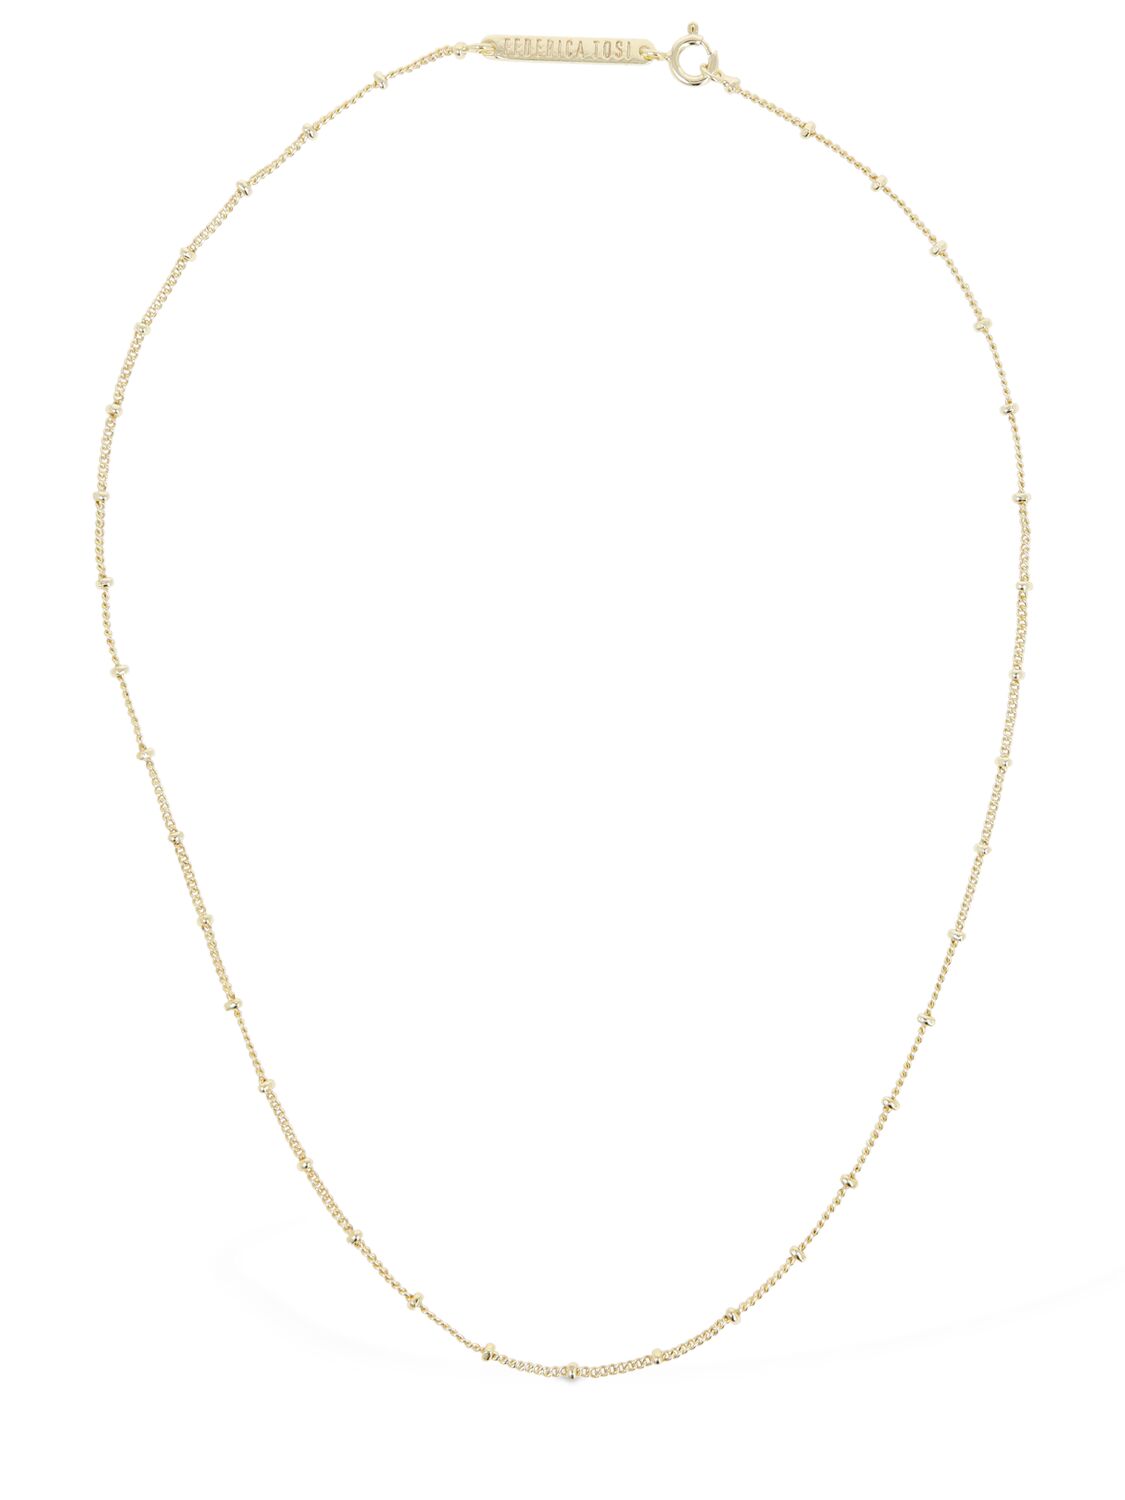 Federica Tosi Lace Camille Chain Necklace In Gold